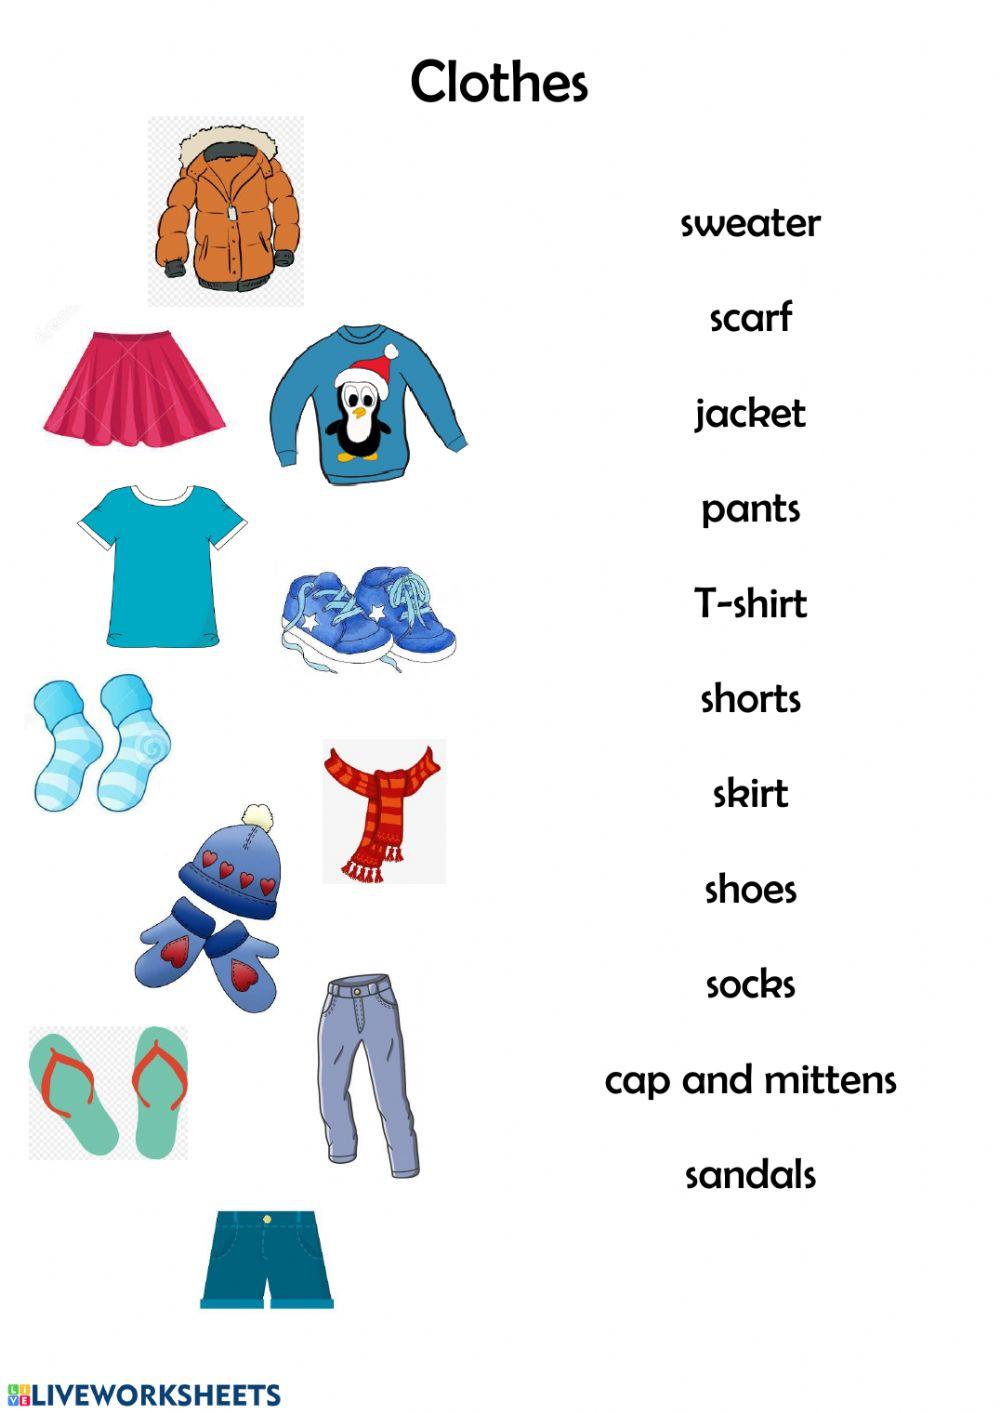 Clothes interactive activity for Grade2 | Live Worksheets